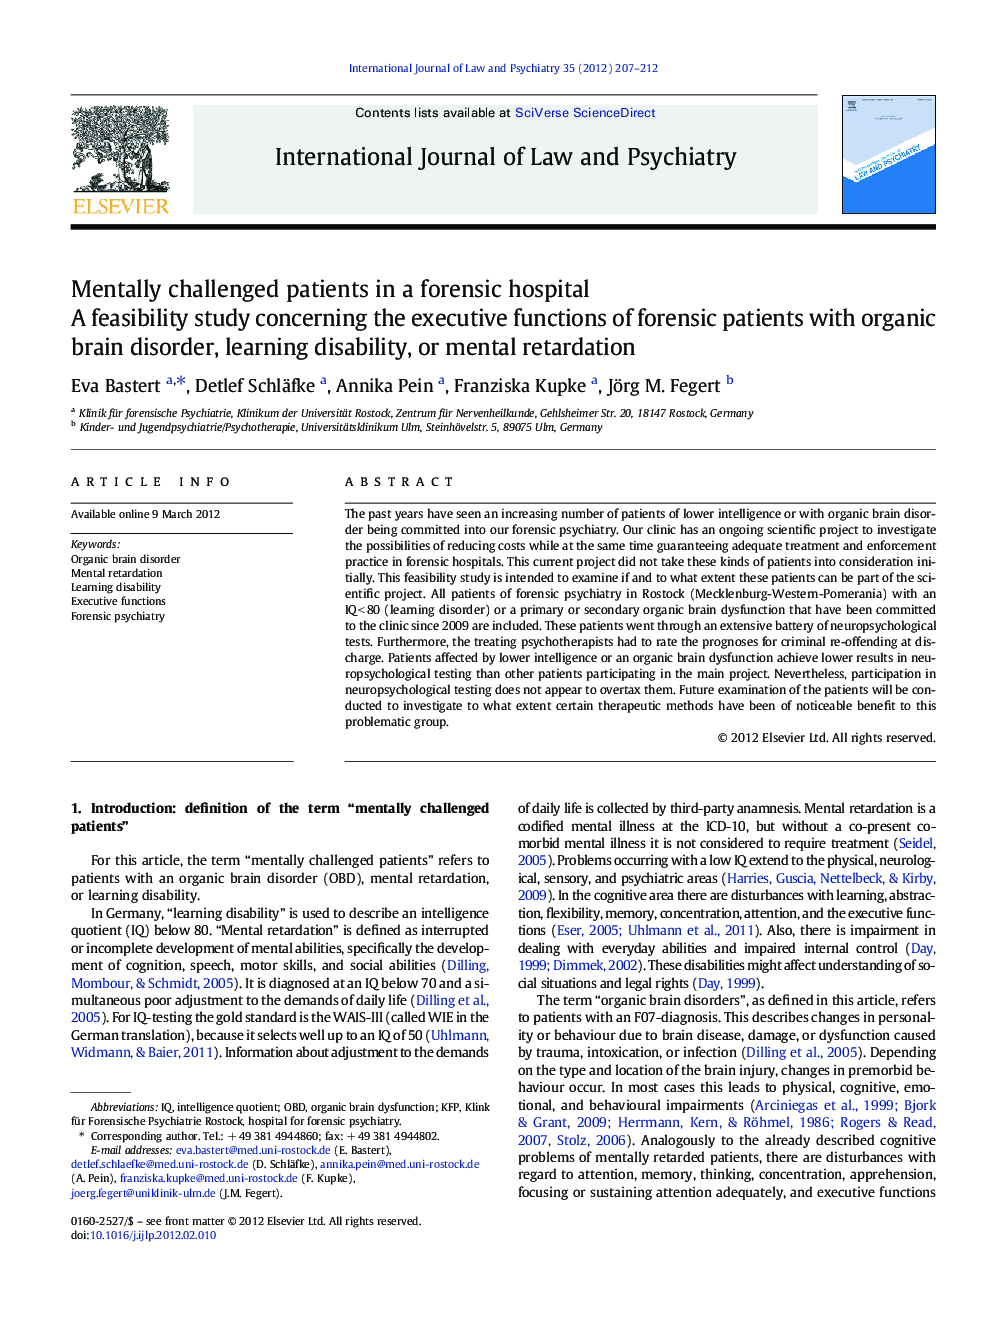 Mentally challenged patients in a forensic hospital: A feasibility study concerning the executive functions of forensic patients with organic brain disorder, learning disability, or mental retardation